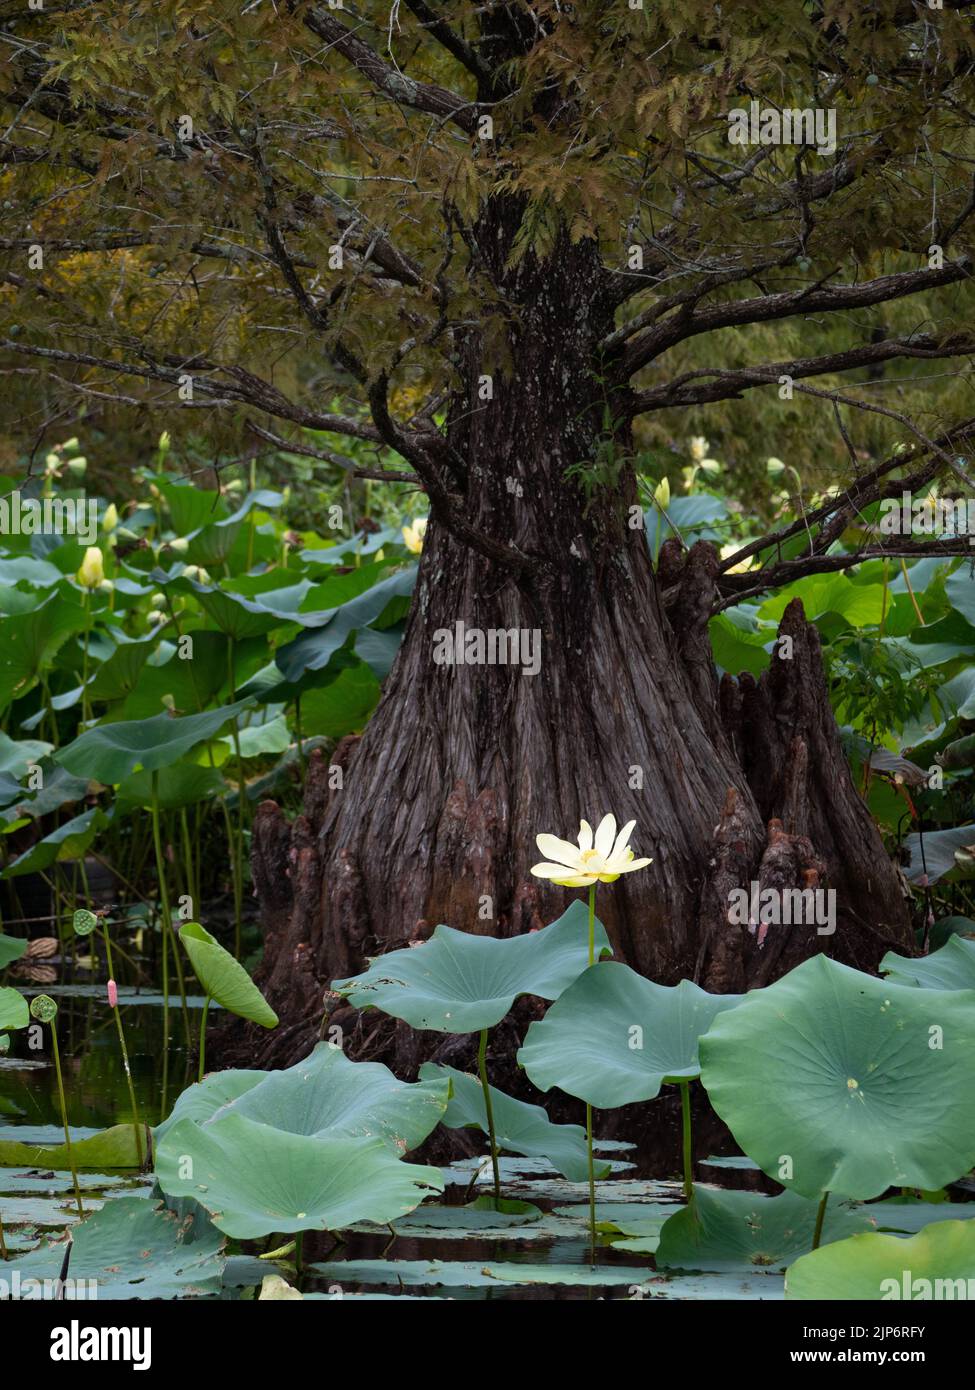 Single yellow lotus flower or Nelumbo lutea, in front of the trunk of a Bald Cypress tree in a pond in Sheldon Lake State Park in Texas. Stock Photo